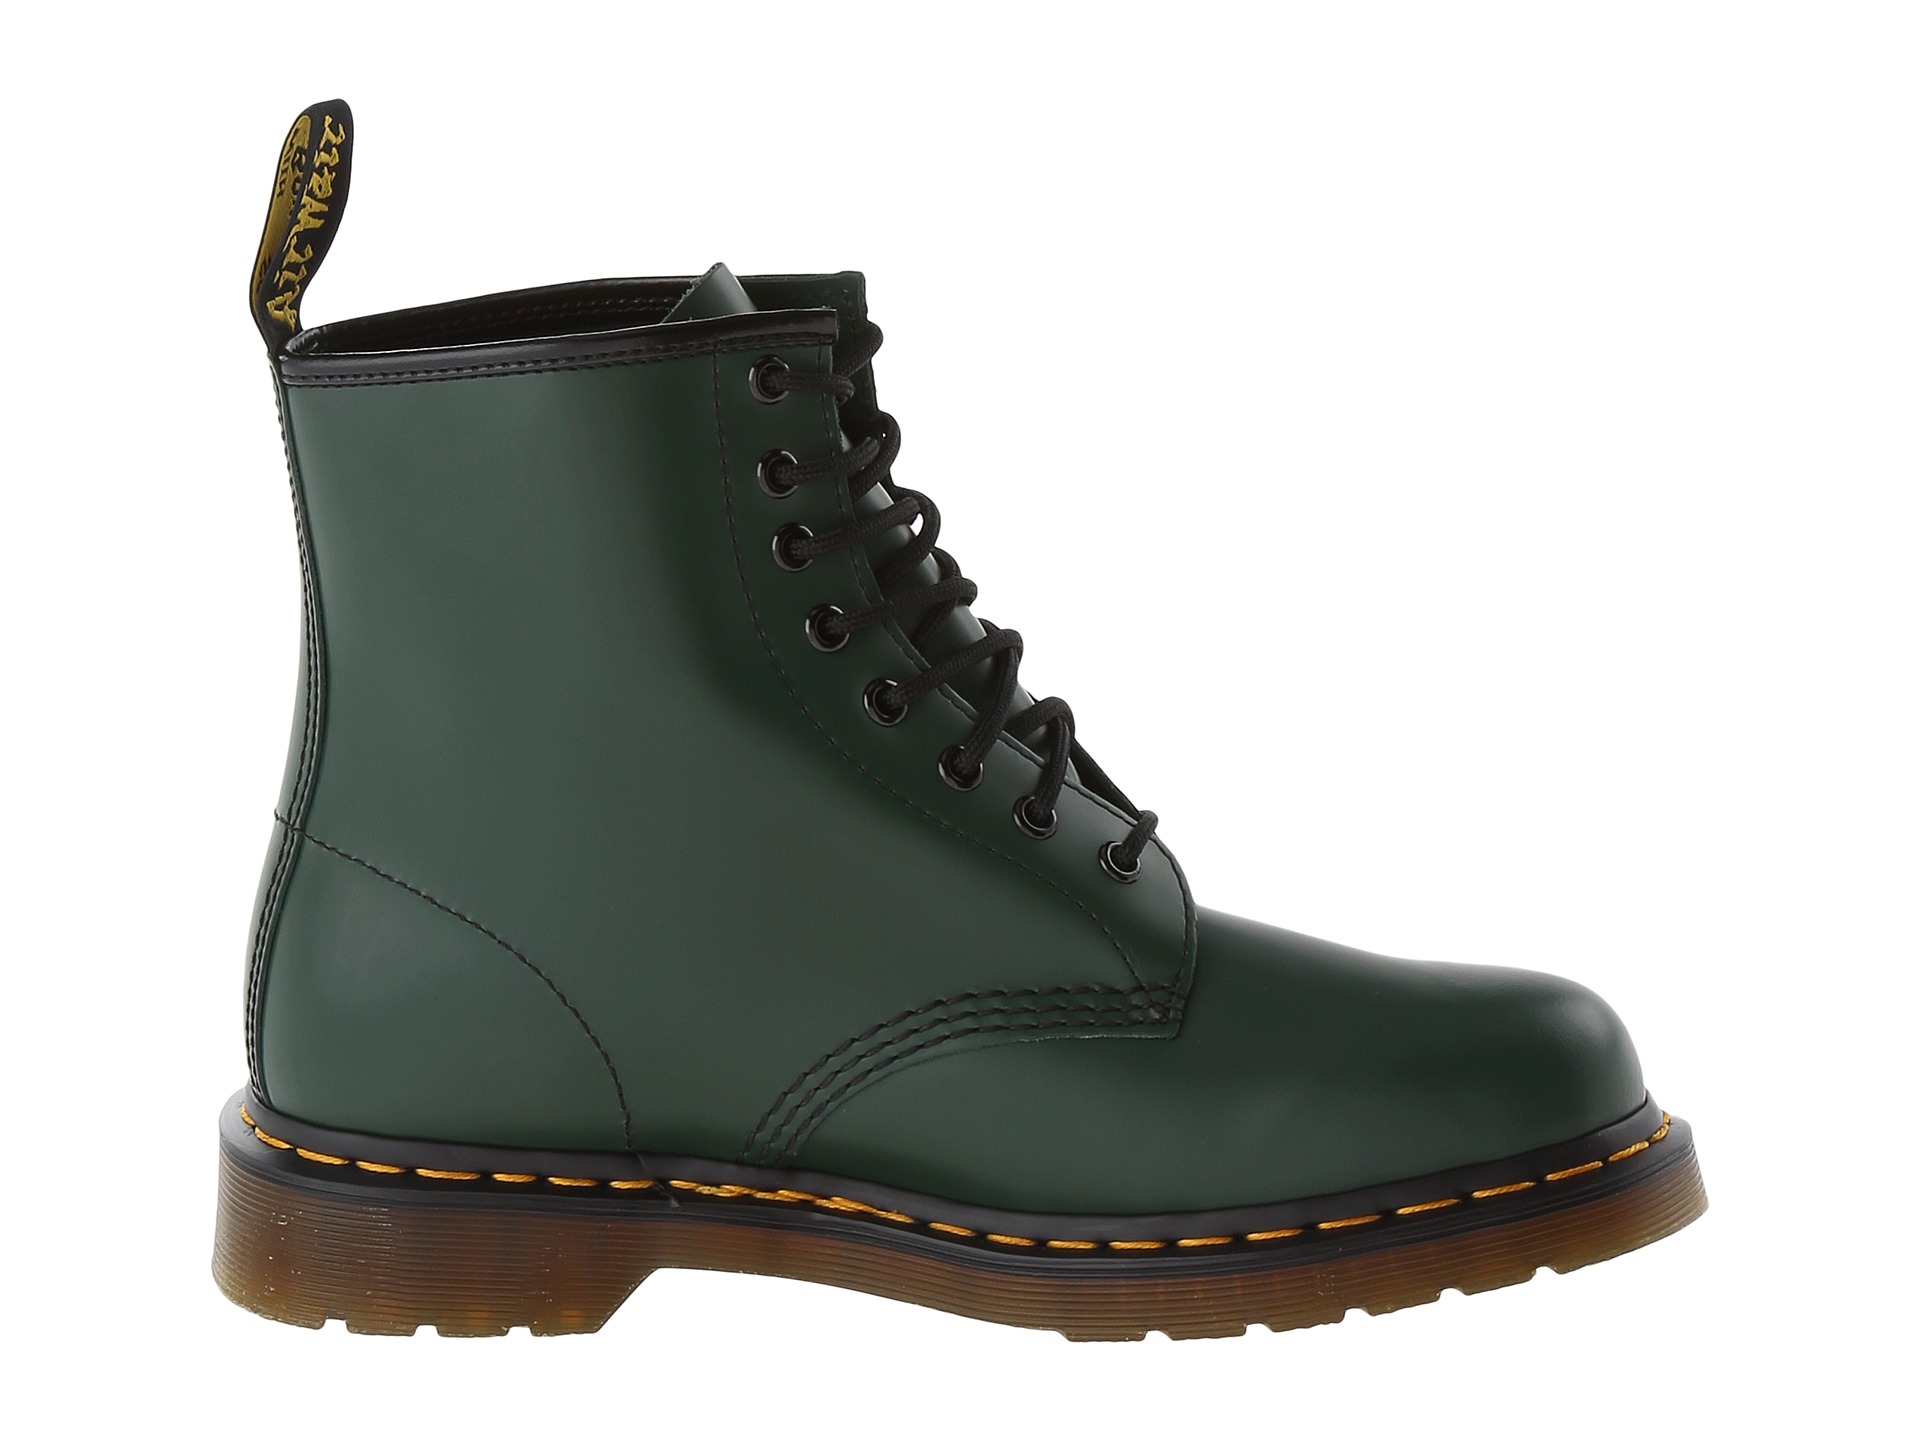 Dr. Martens 1460 Green Smooth - Zappos.com Free Shipping BOTH Ways